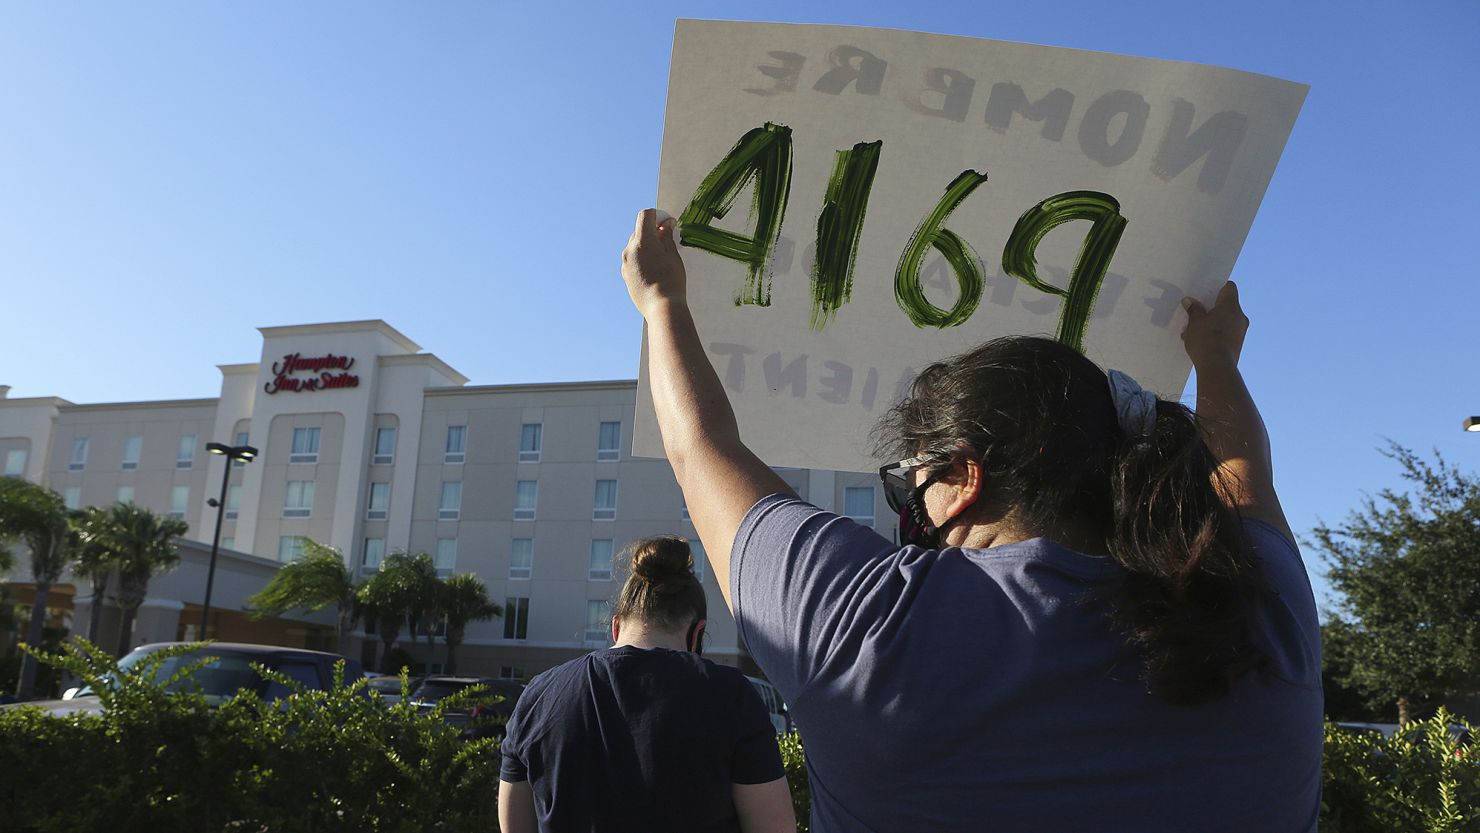 Protesters wave signs in front of the Hampton Inn hotel in McAllen, Texas, where migrants were being detained, on July 23, 2020.